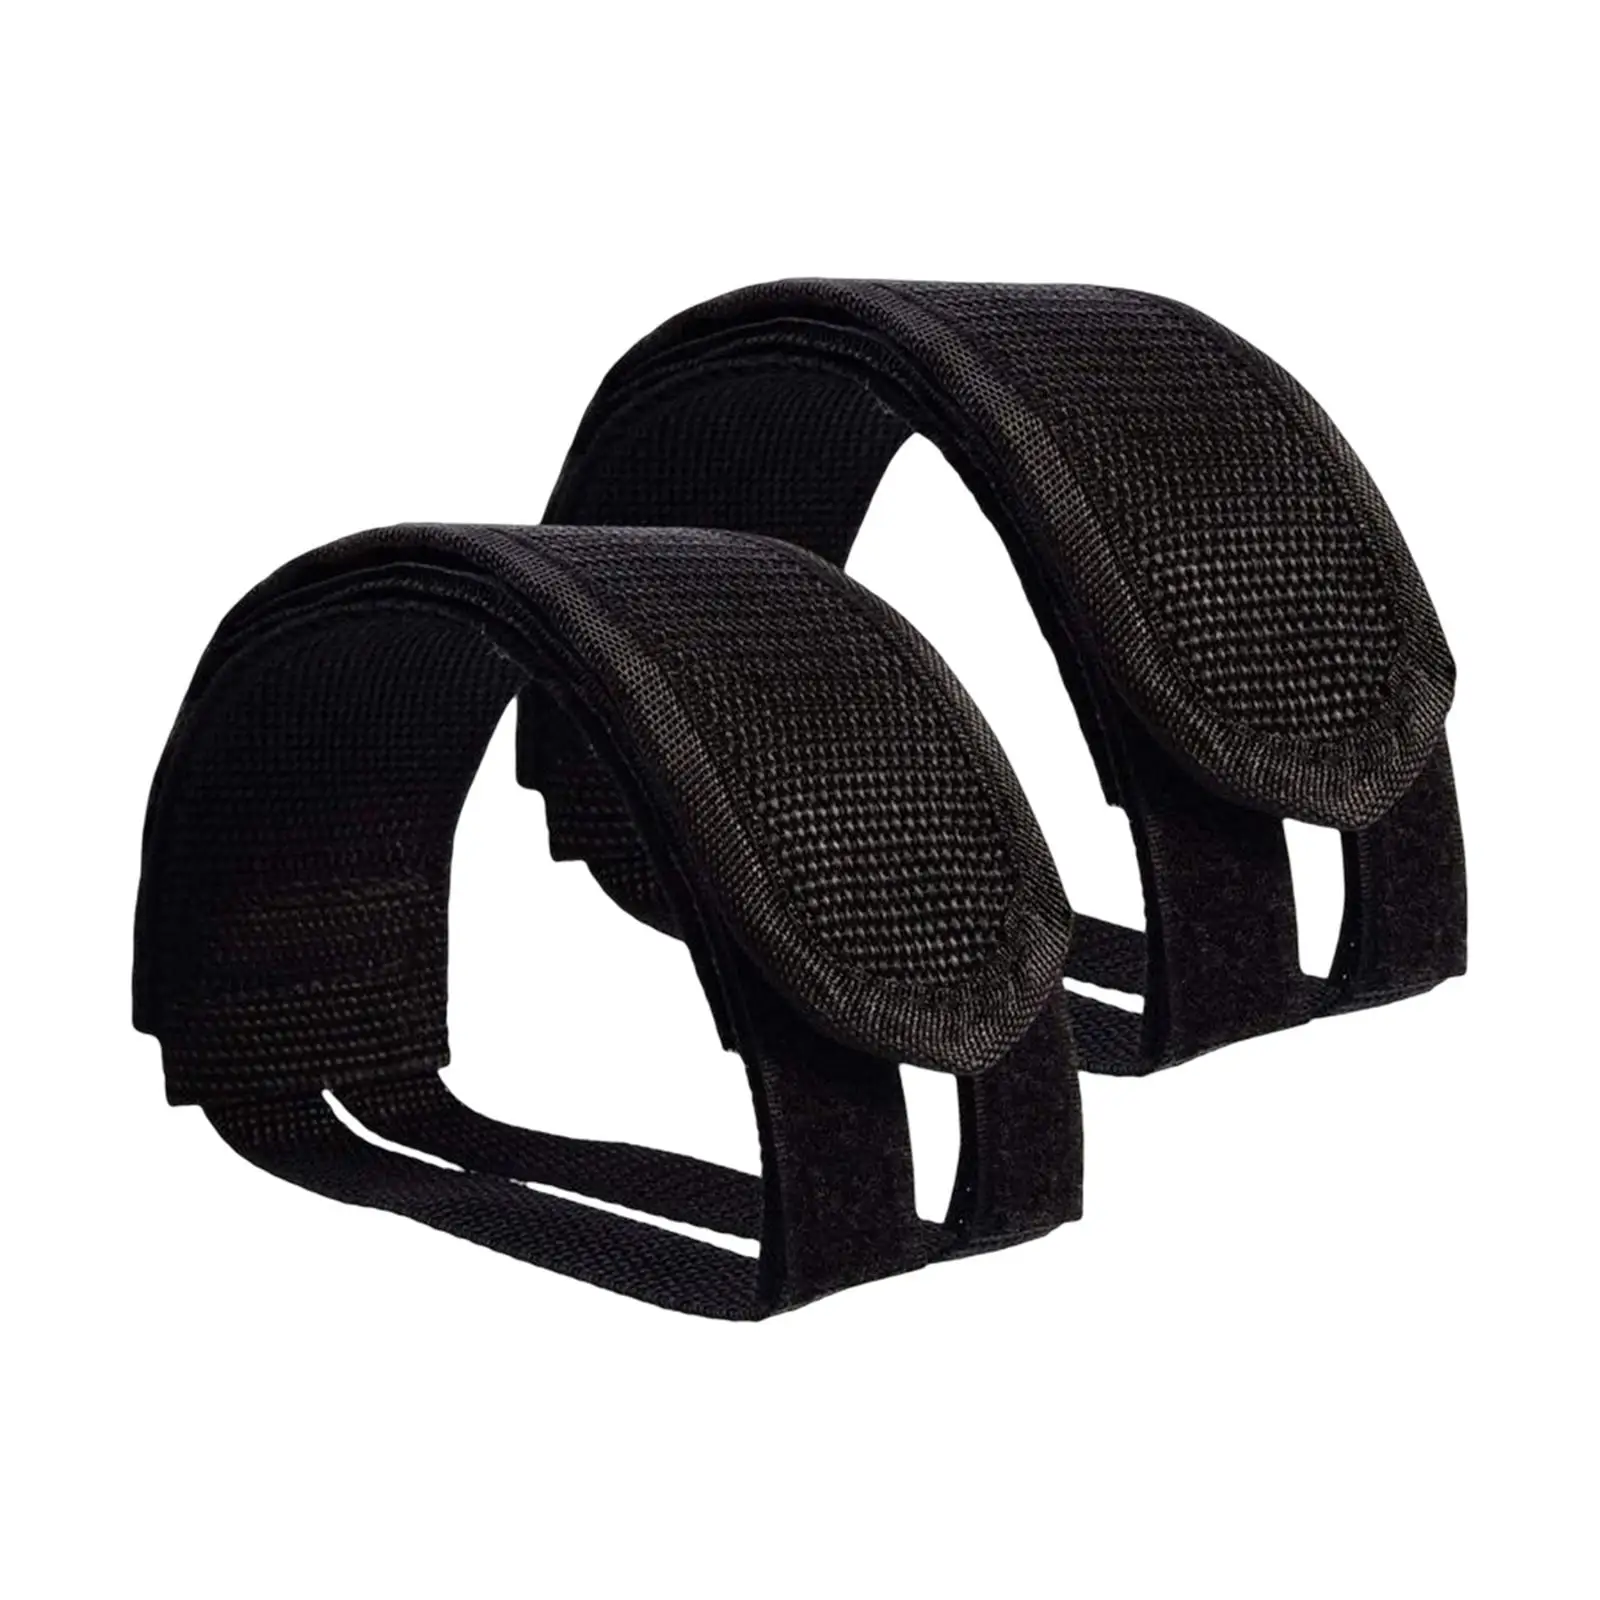 Multifunction Bike Pedal Band Easy to Use Durable Riding Cycling Pedals Bands Foot Retention Straps for Bike Fitness Outdoor Gym